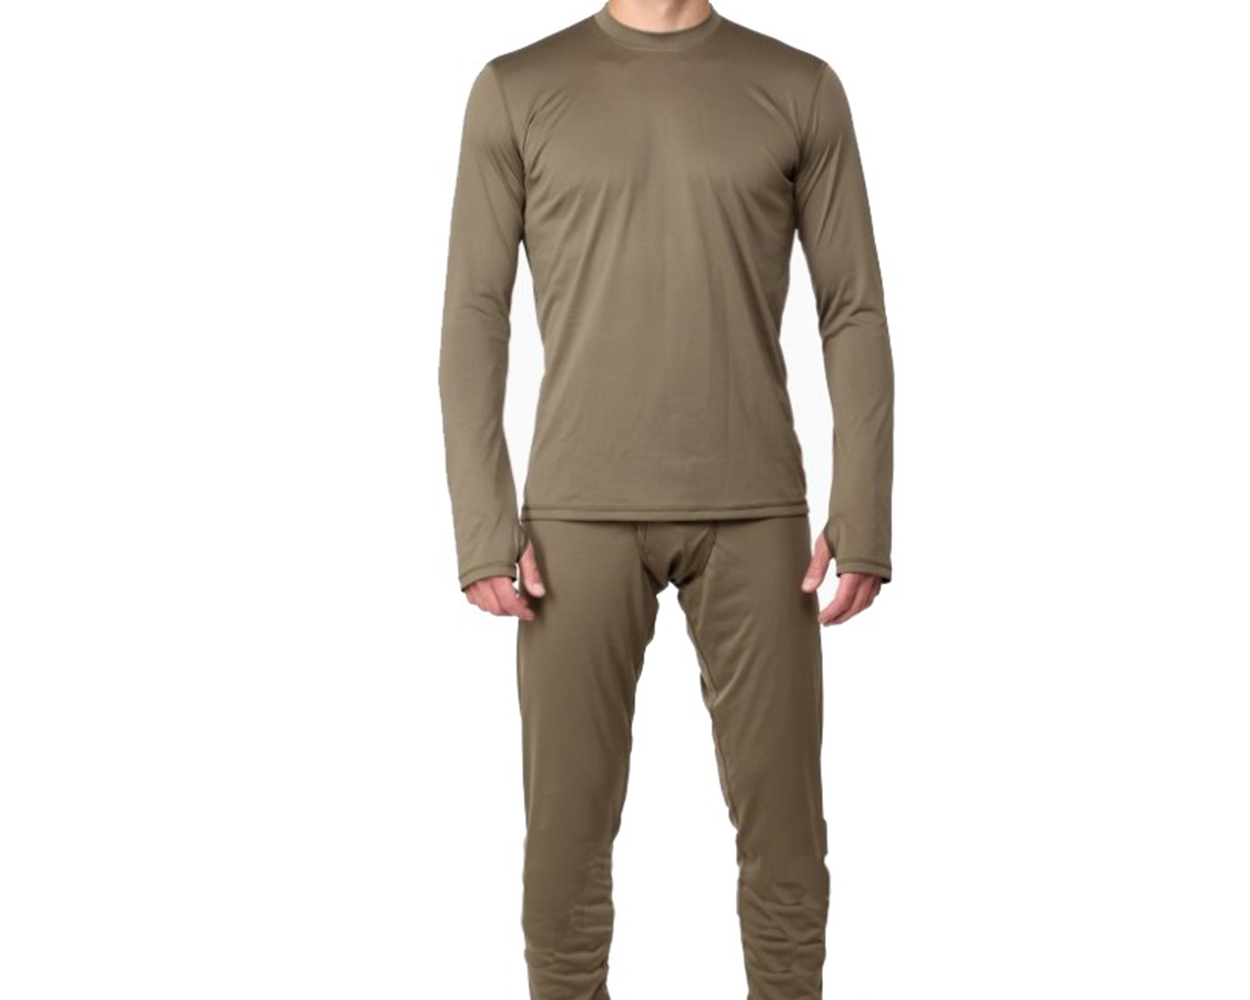 Russian Army Military thermal underwear / thermal set / VKPO